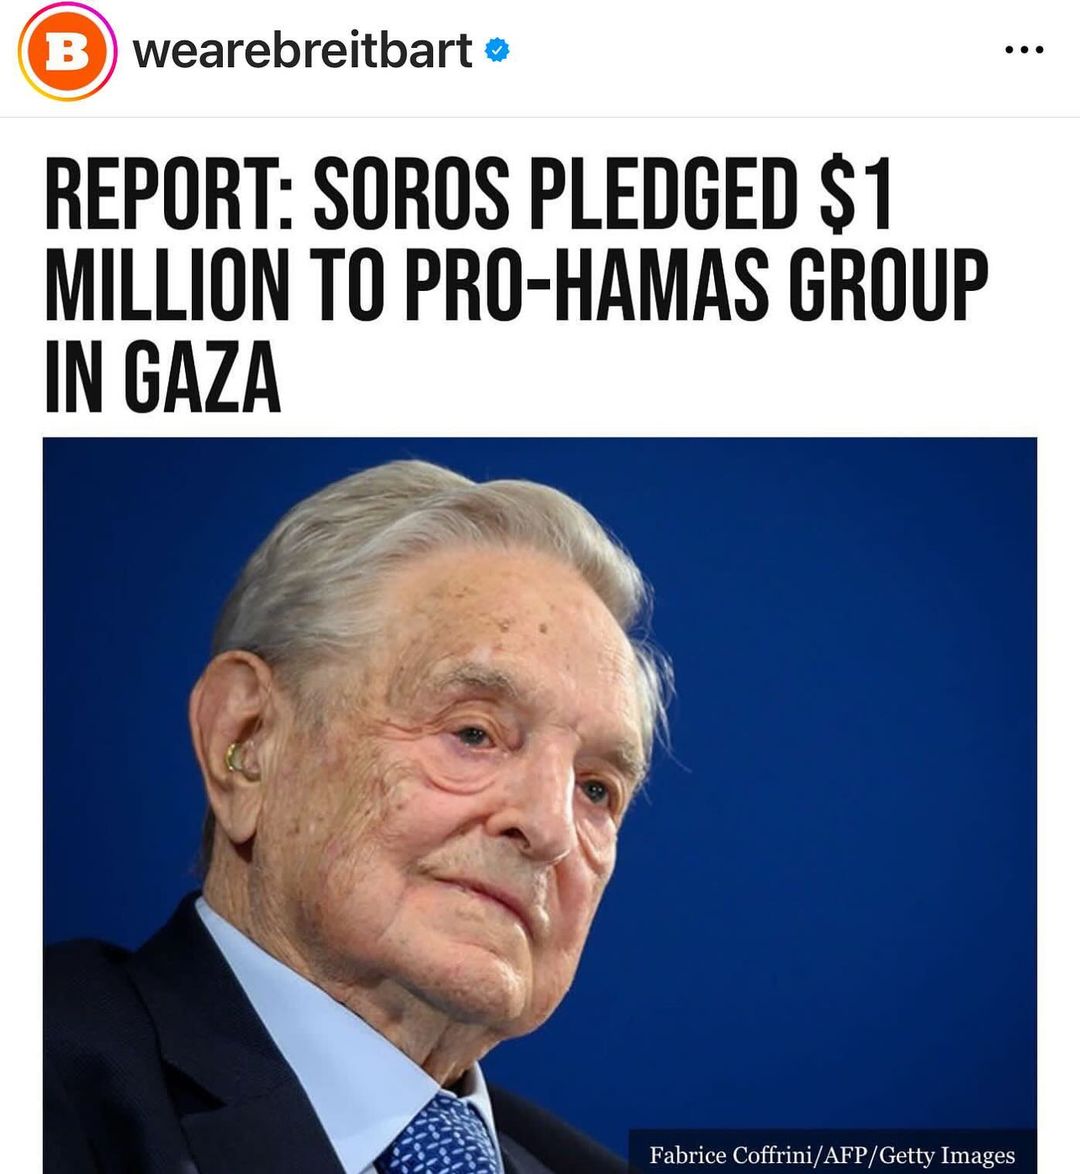 Why is Soros a known terrorist allowed to operate in the United States ? 🇺🇸 #HIAW